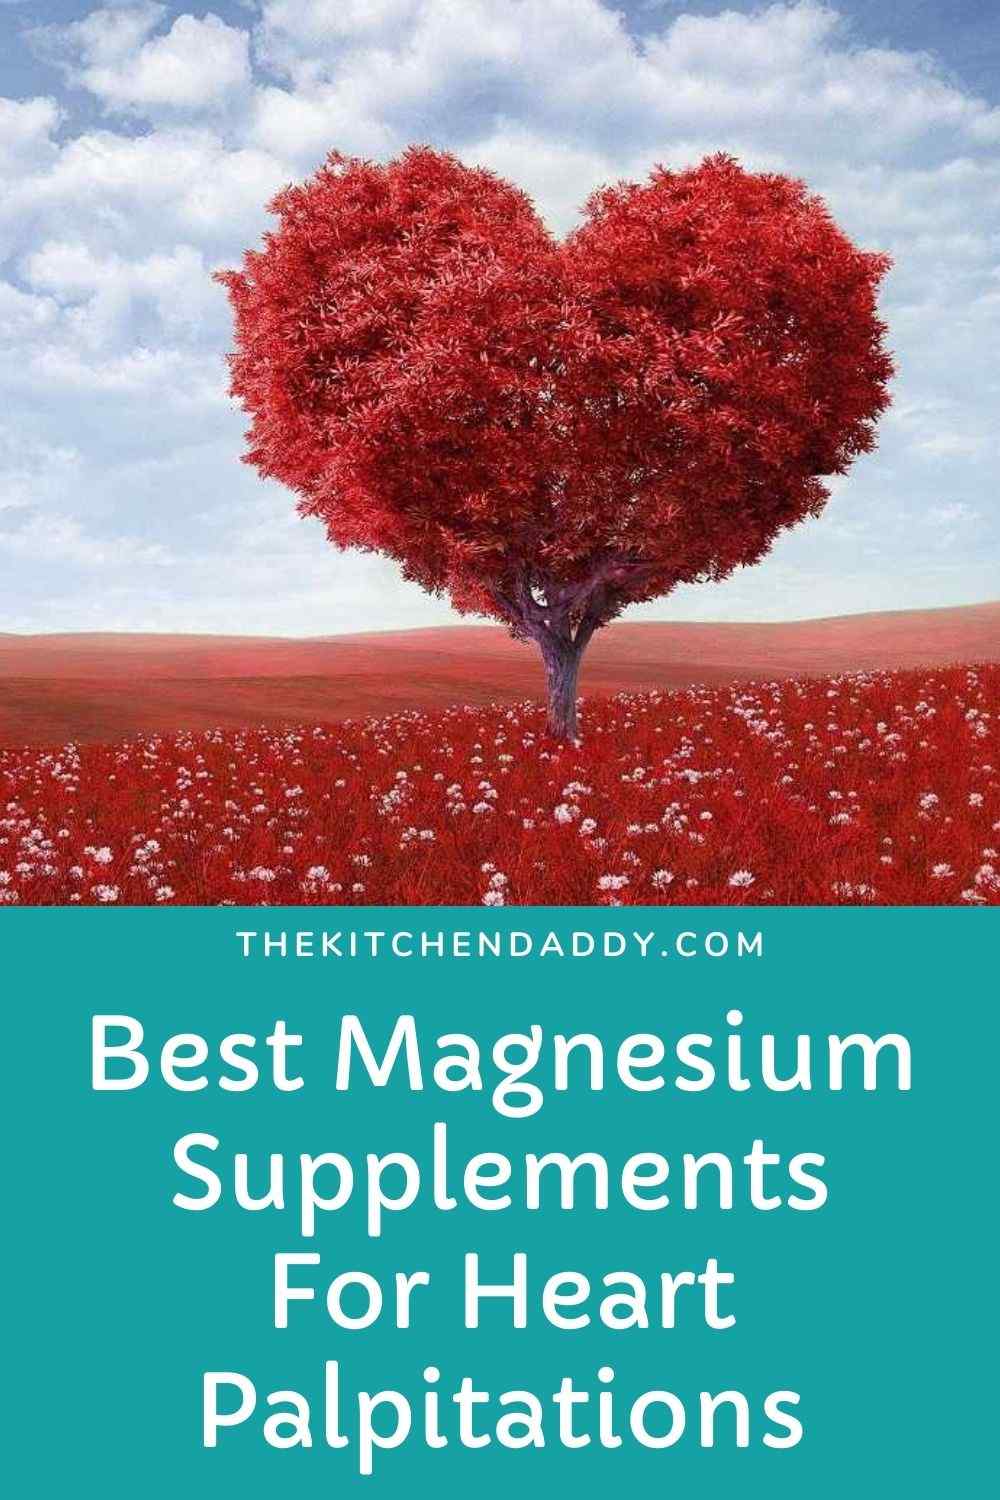 Best Magnesium Supplements For Heart Palpitations